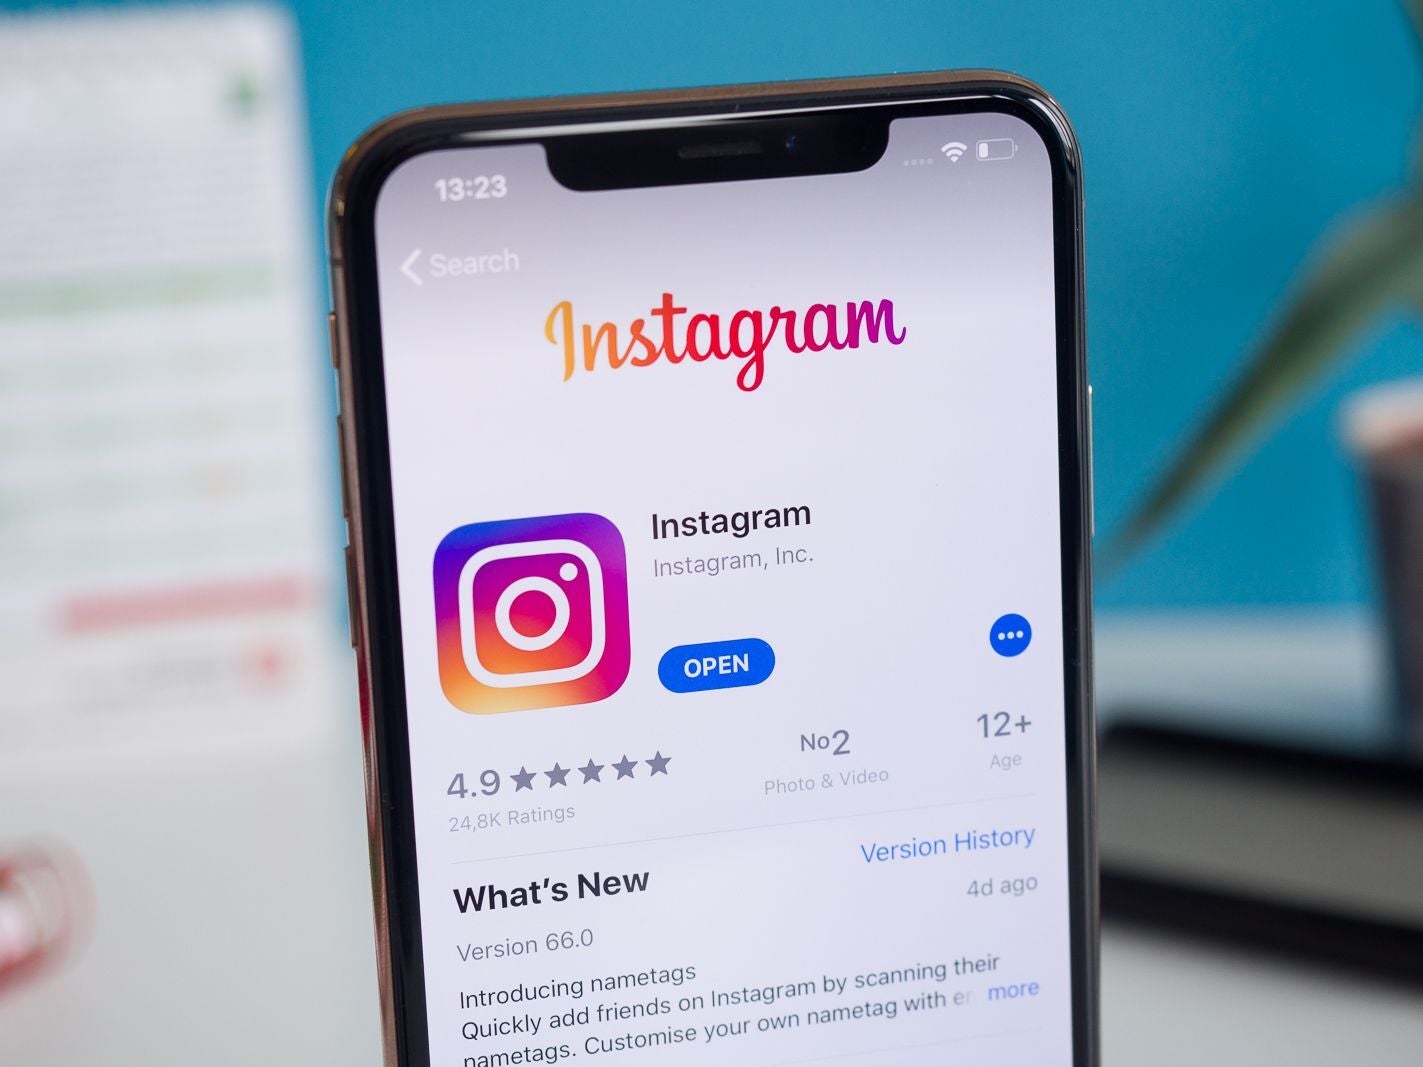 Instagram’s popularity has made it a prime target for legal accusations such as this. - Social Media giants could become pursued by the law due to mental health damage to US youths